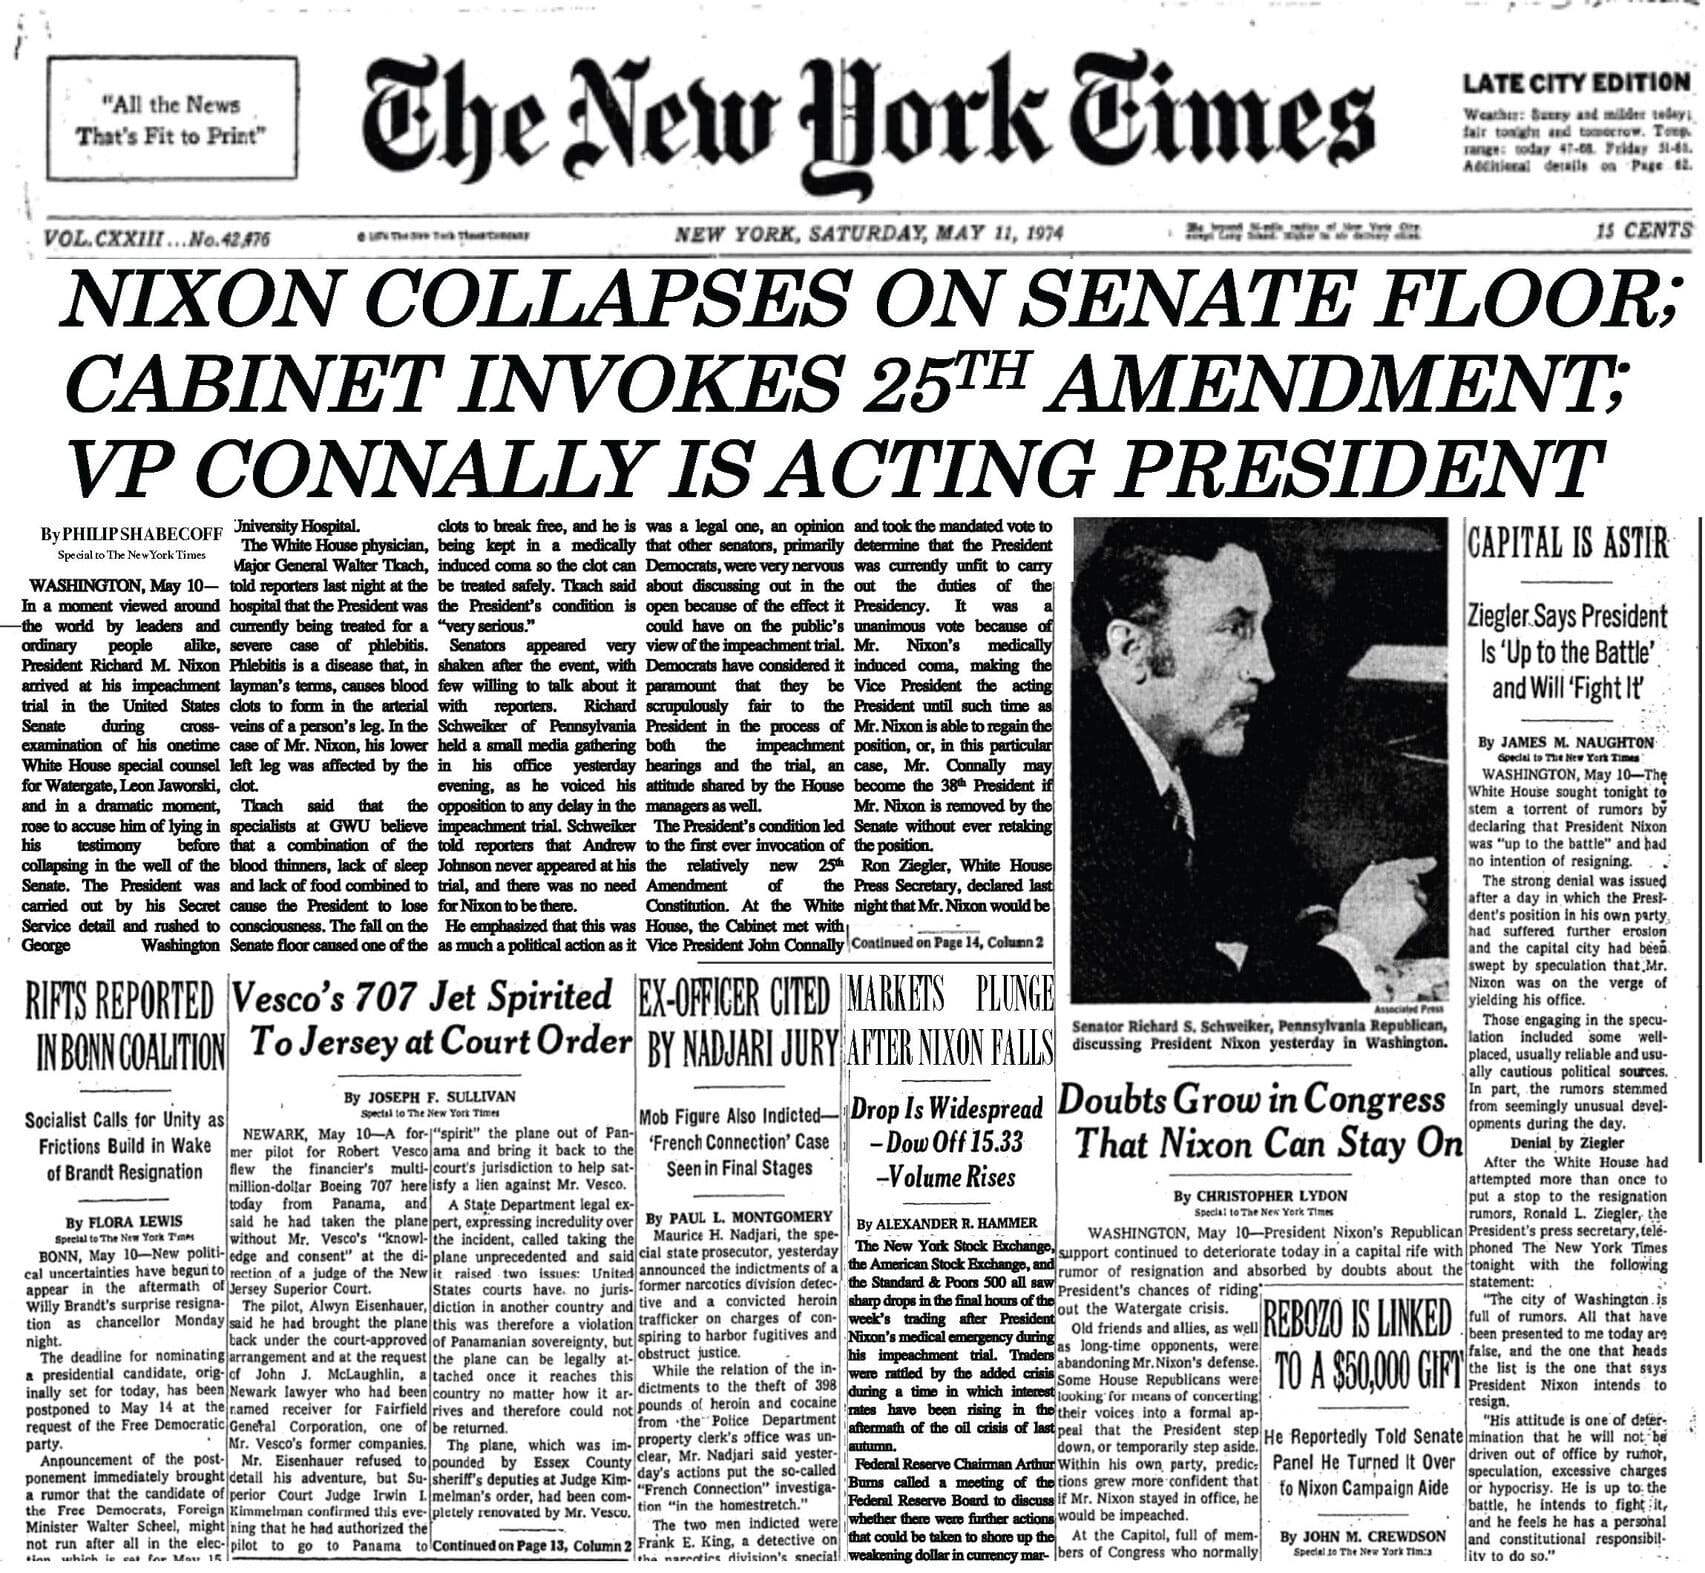 NYT front page 5-11-74 r1 (1).jpg